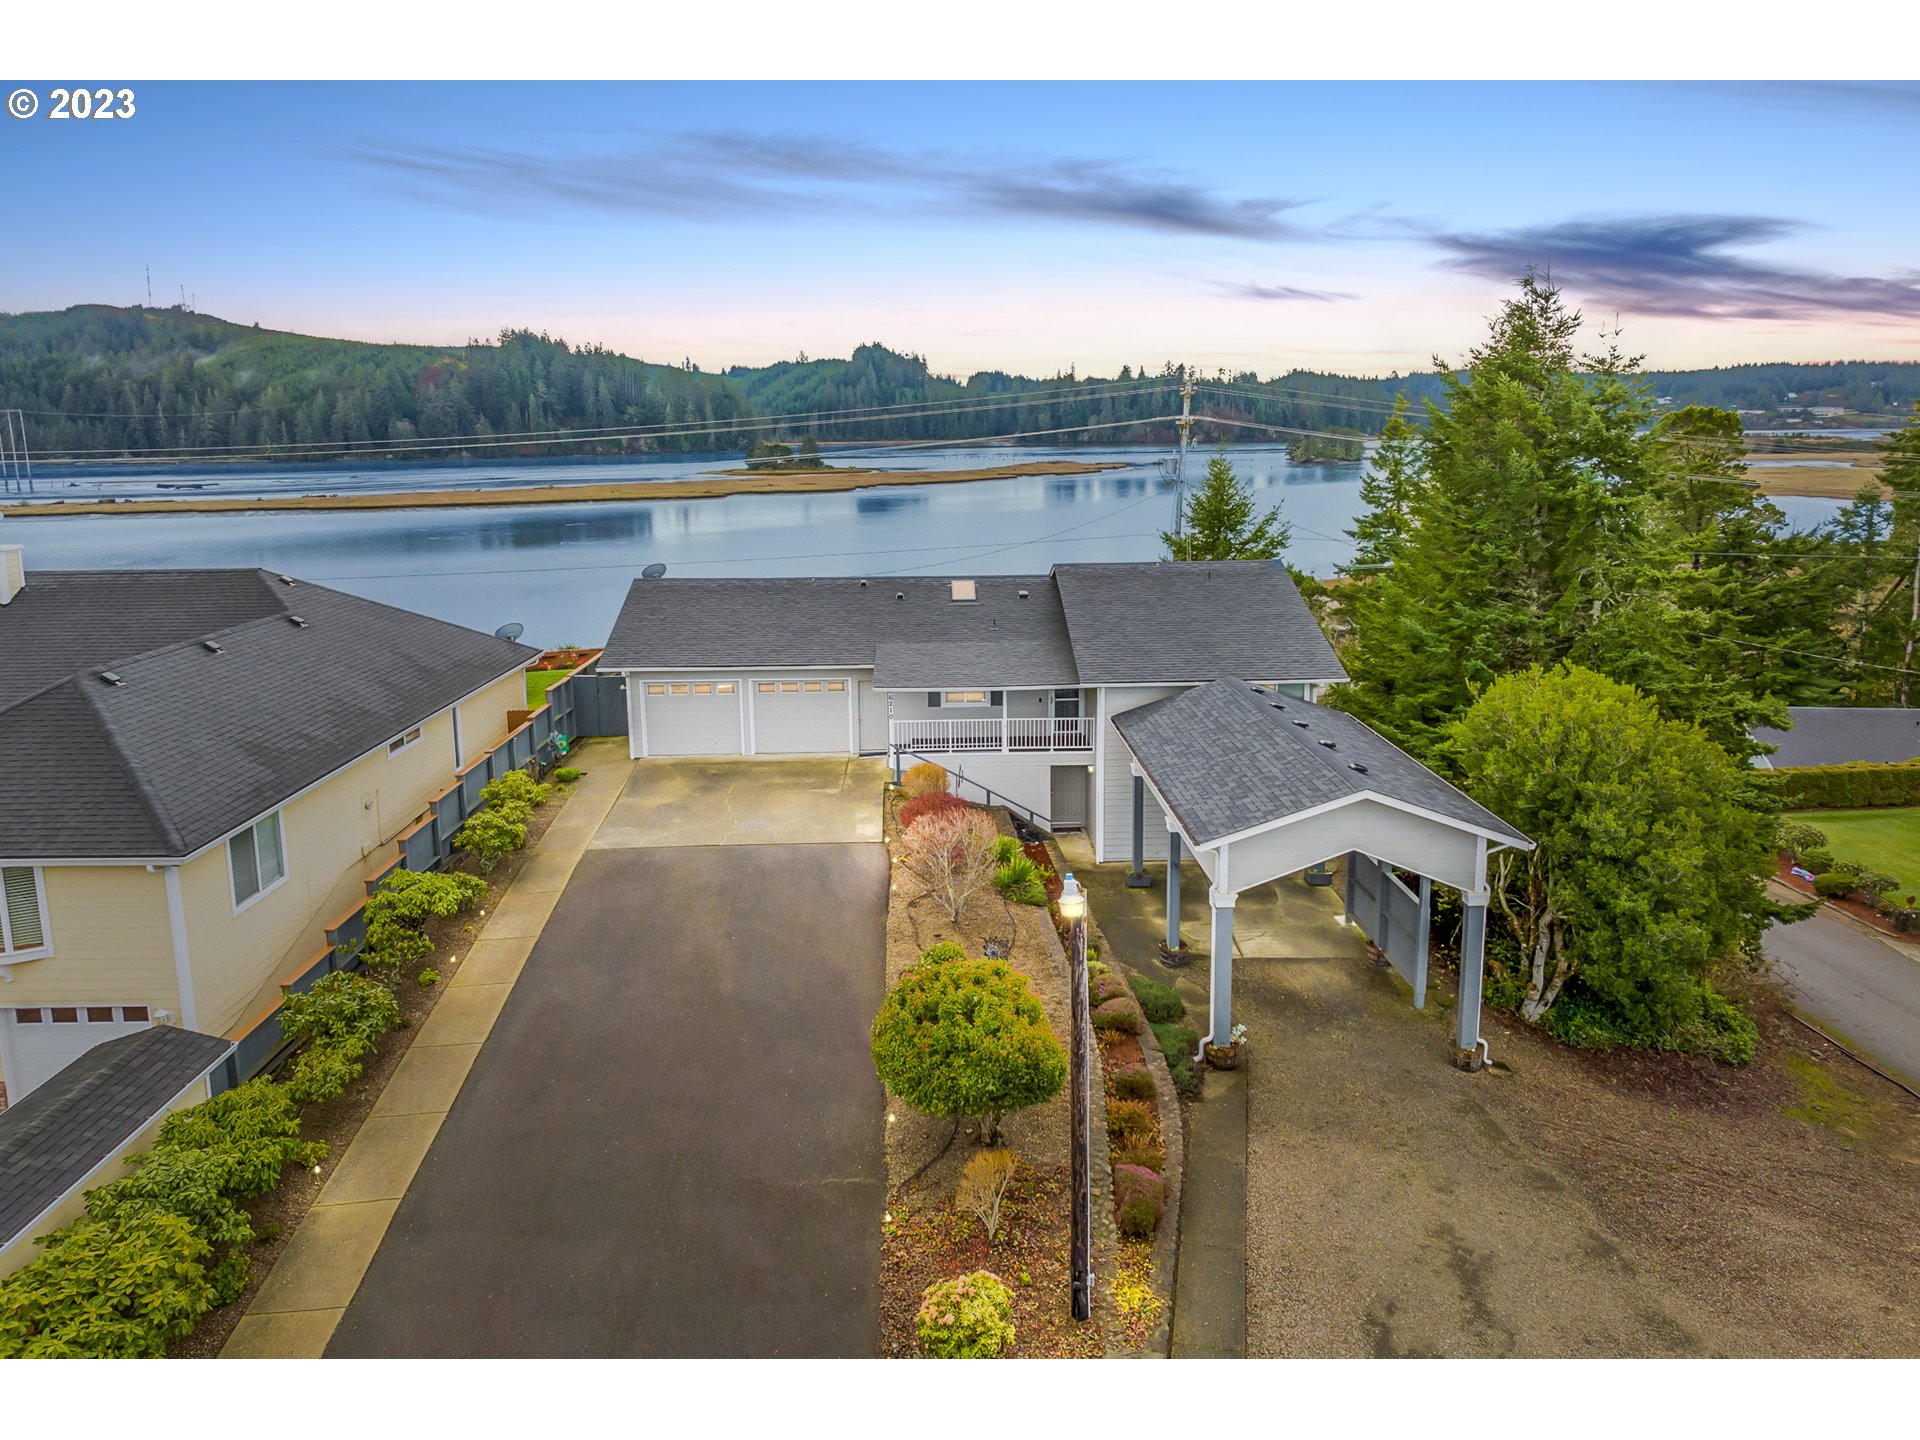 Majestic Siuslaw river views can be seen from nearly every room in this gloriously remodeled custom home. Open living area with luxury vinyl and beautfully updated kitchen. Solarium off of living room. Main floor primary room with walk-in closet, bathroom with Luxstone roll in showers. Spa room with half bath. Lower level family room with two additional bedrooms and full bath. Accessibility with front door ramp, chairlift. Deck and gazebo as well as covered porch. RV carport and hookups.